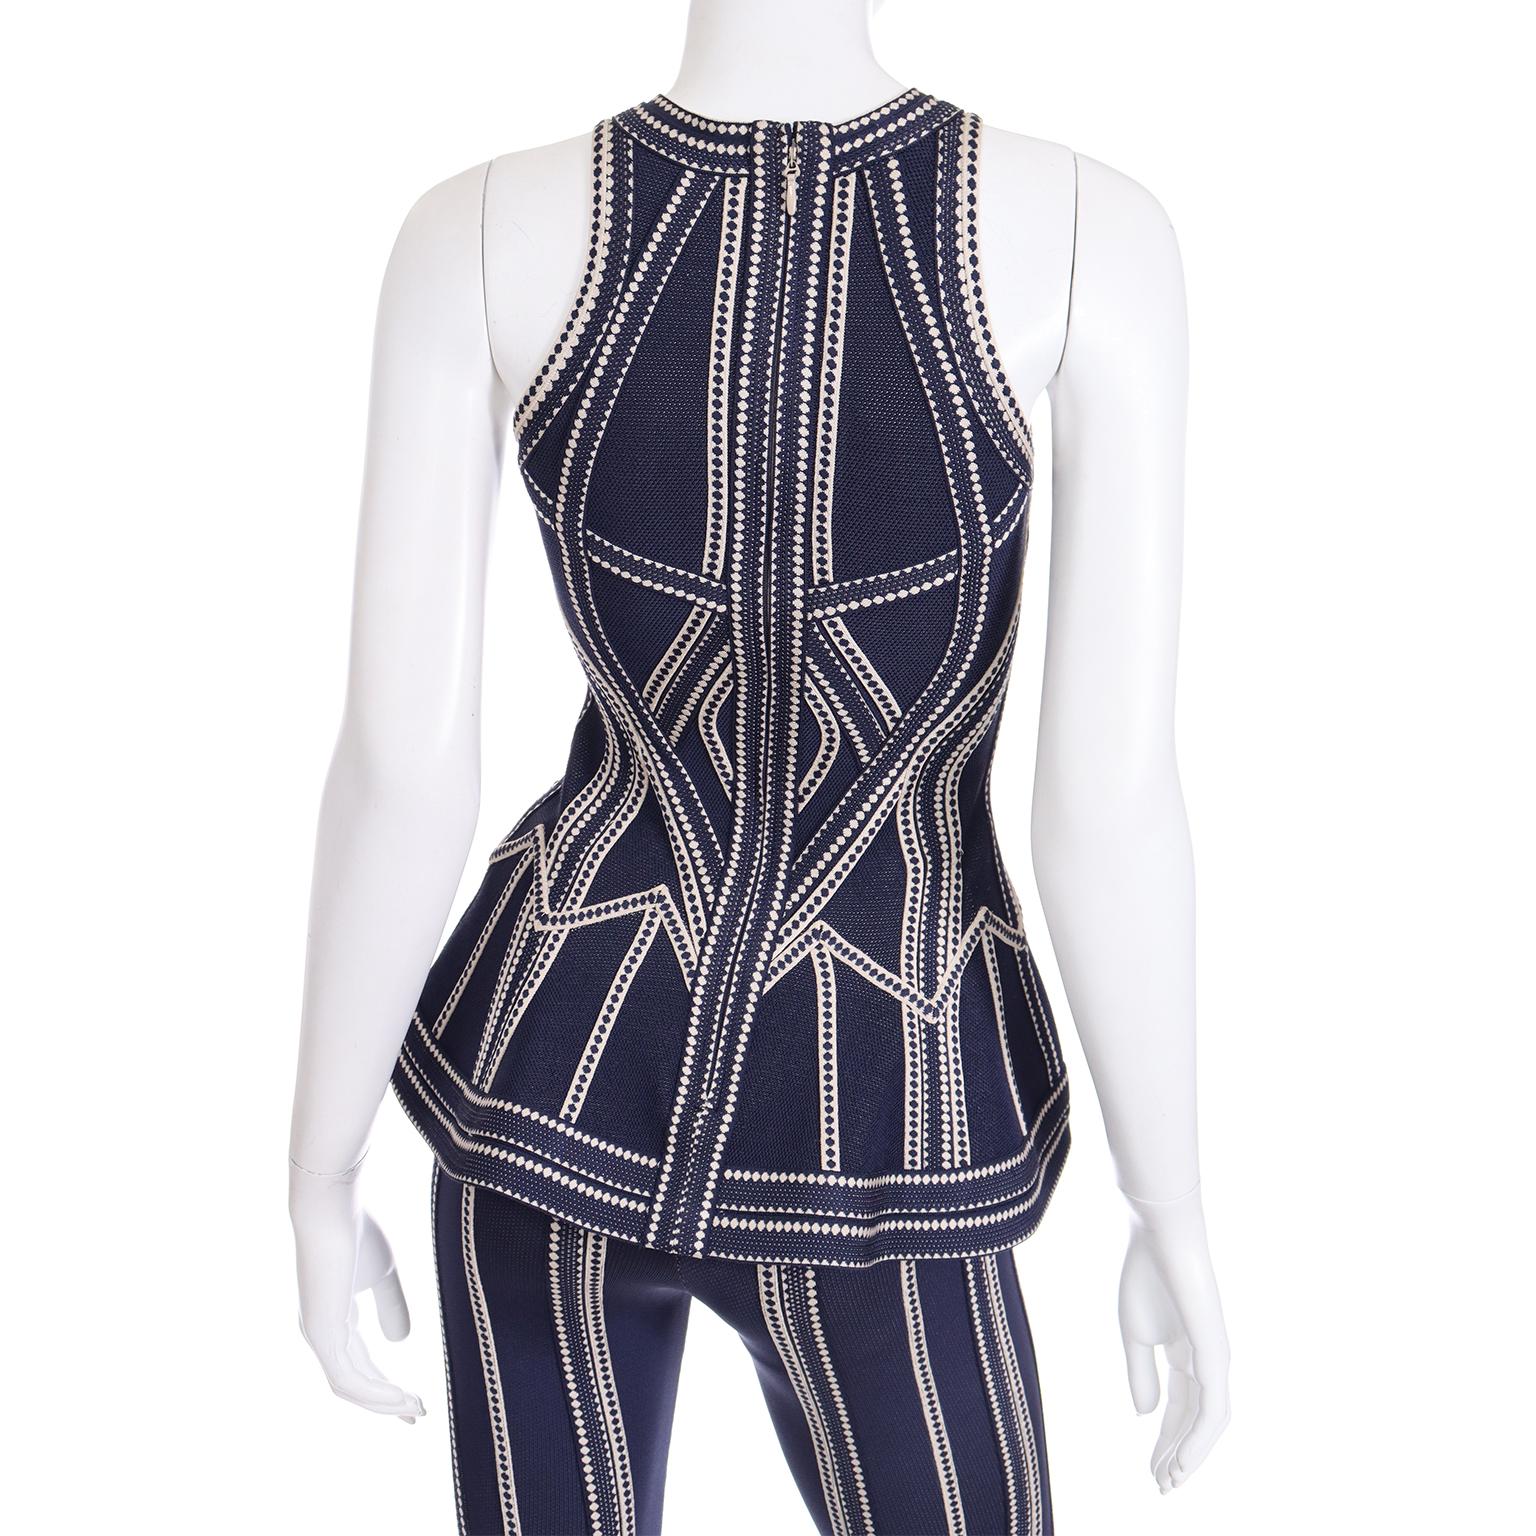 2016 Herve Leger Vintage Blue and White Flared Pants & Cutout Top Runway Outfit For Sale 3